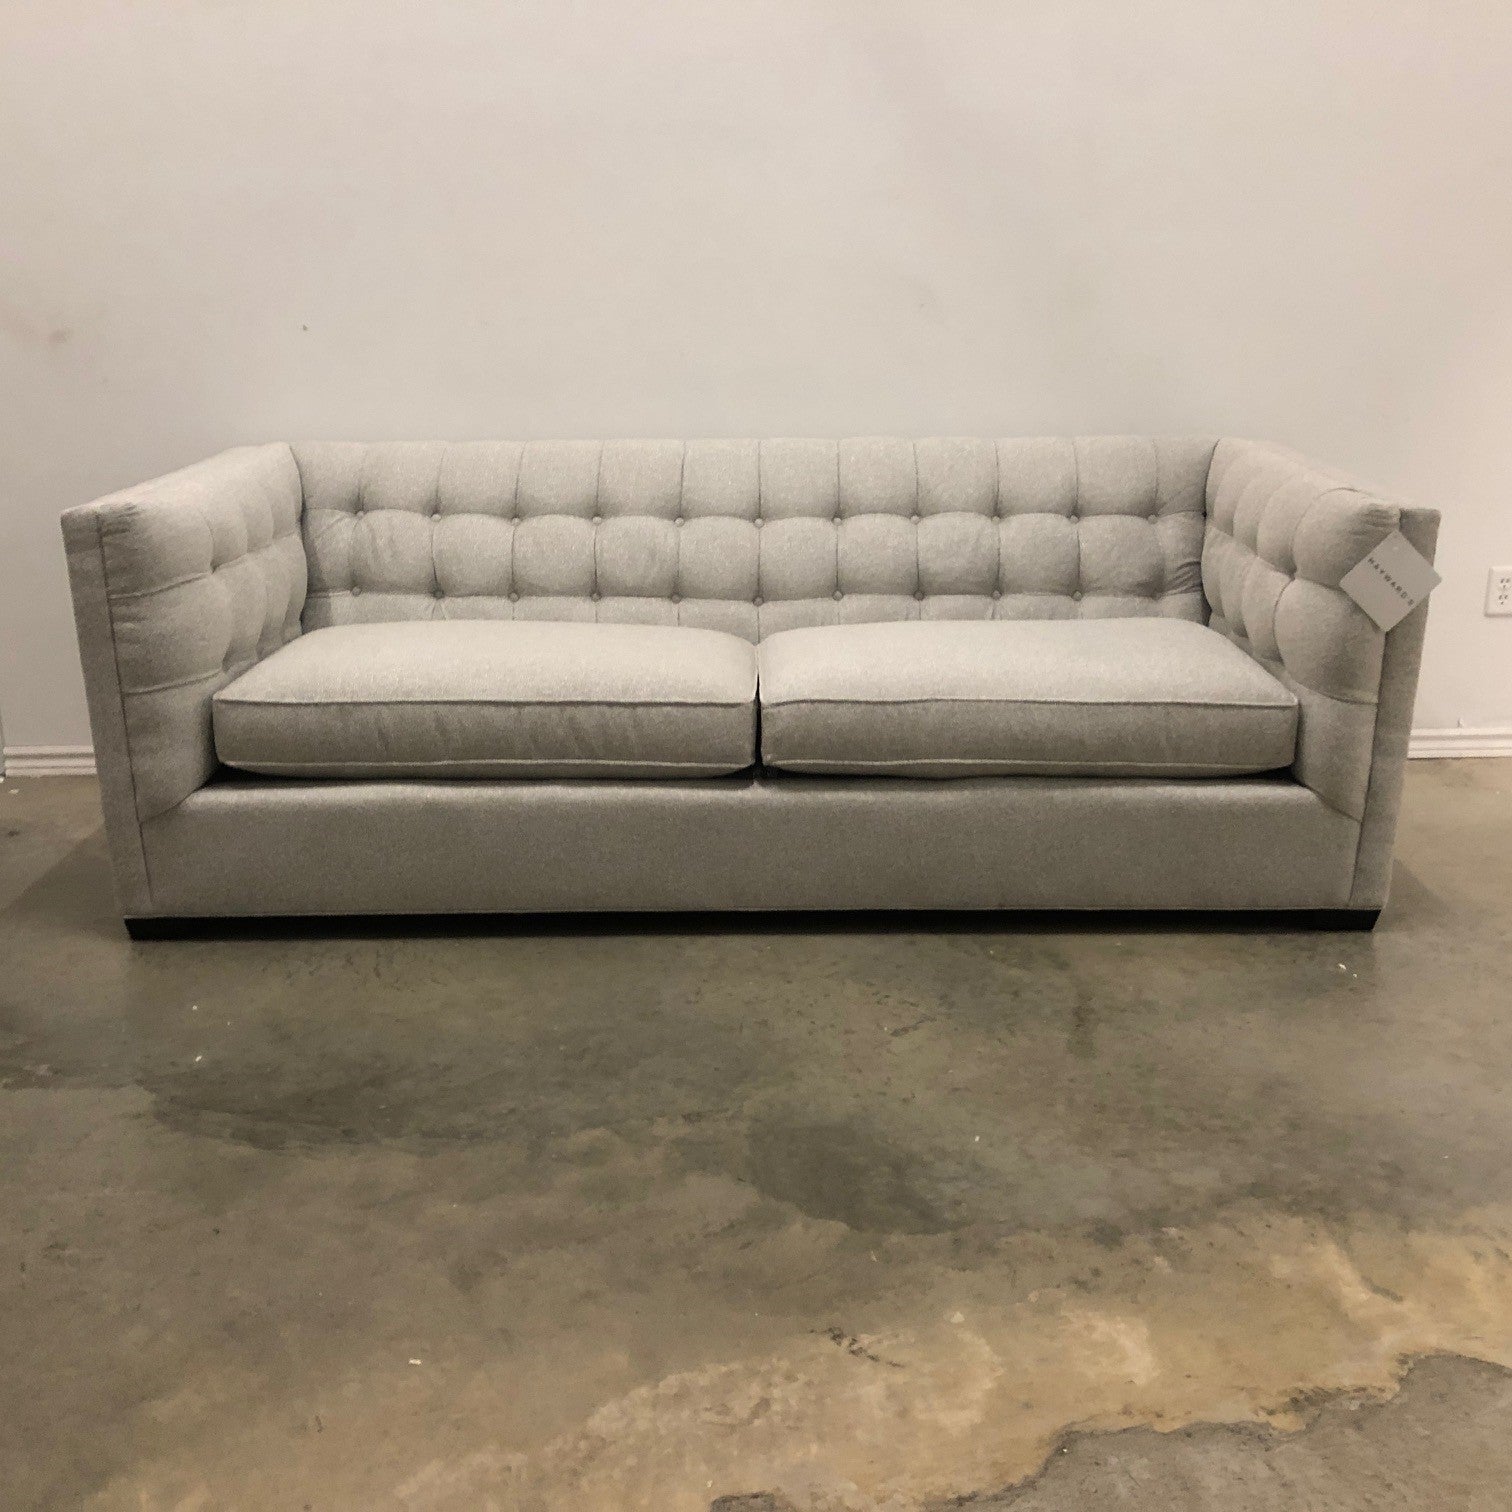 QUINCEY TUFTED FABRIC SOFA